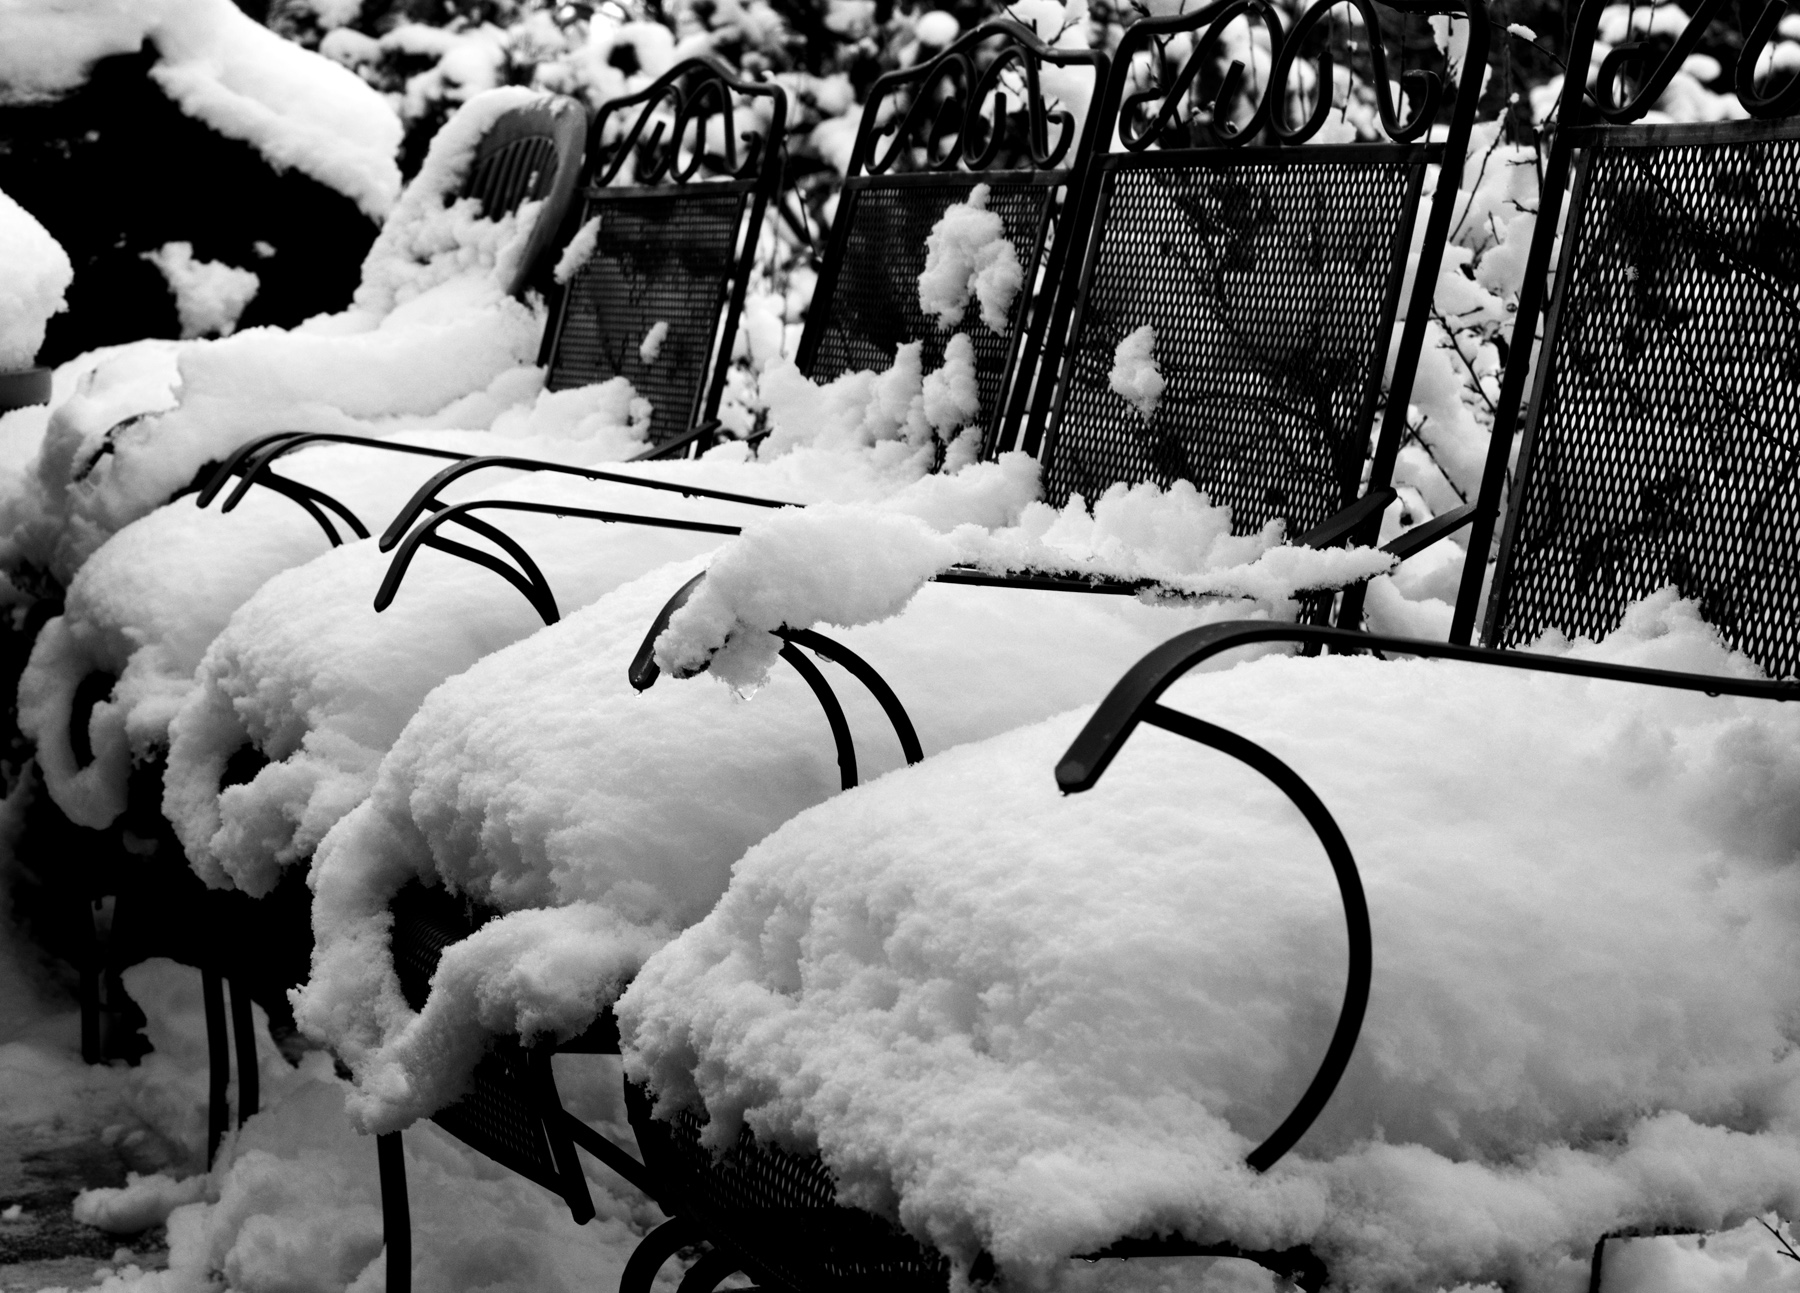 L1003697 Deck Chairs and Snow.jpg